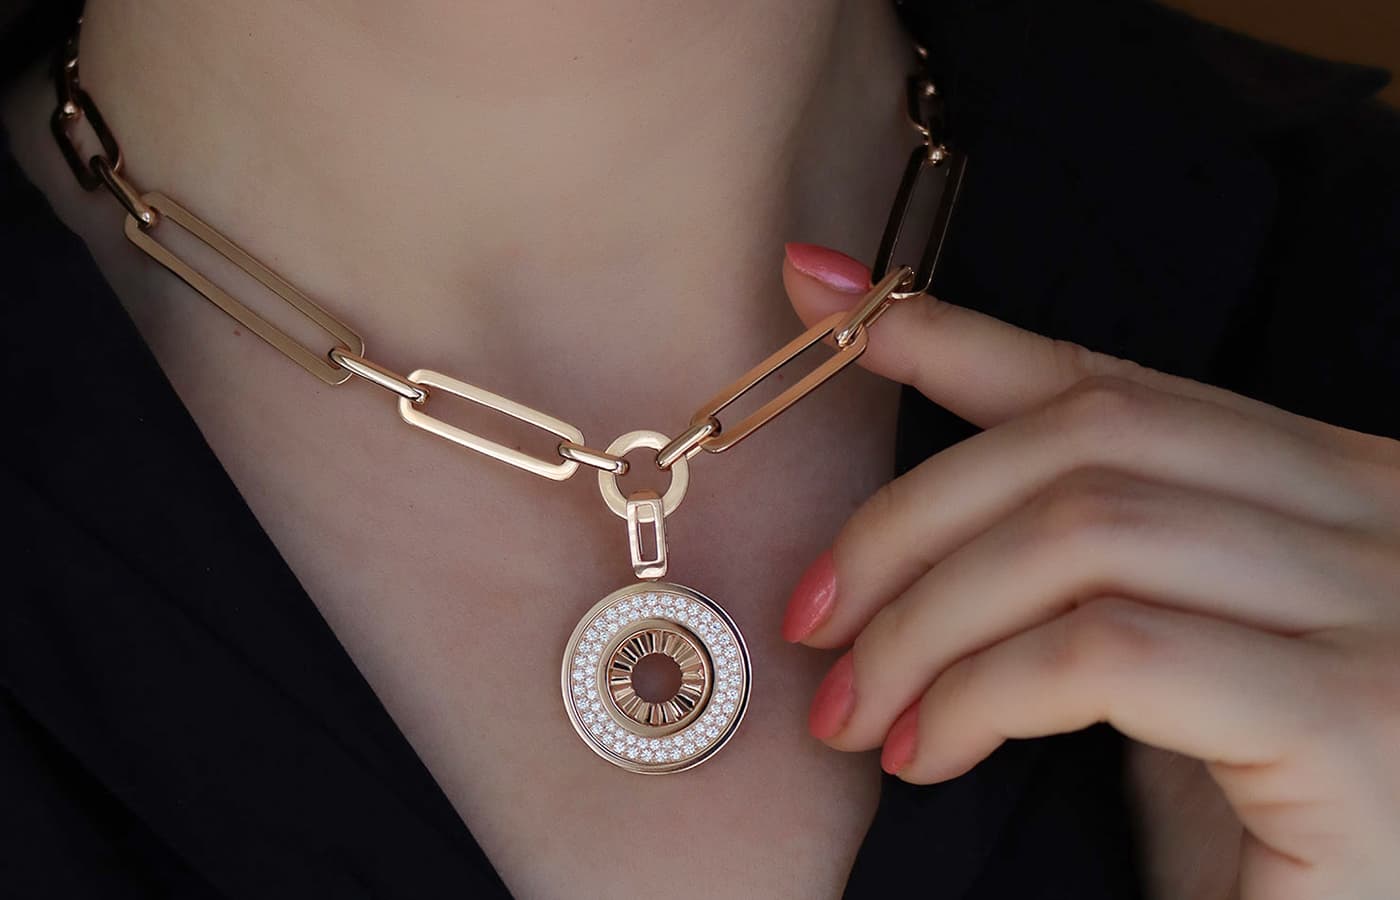 Ferrat Paris Persona Internal Ray pendant necklace with diamonds in rose gold